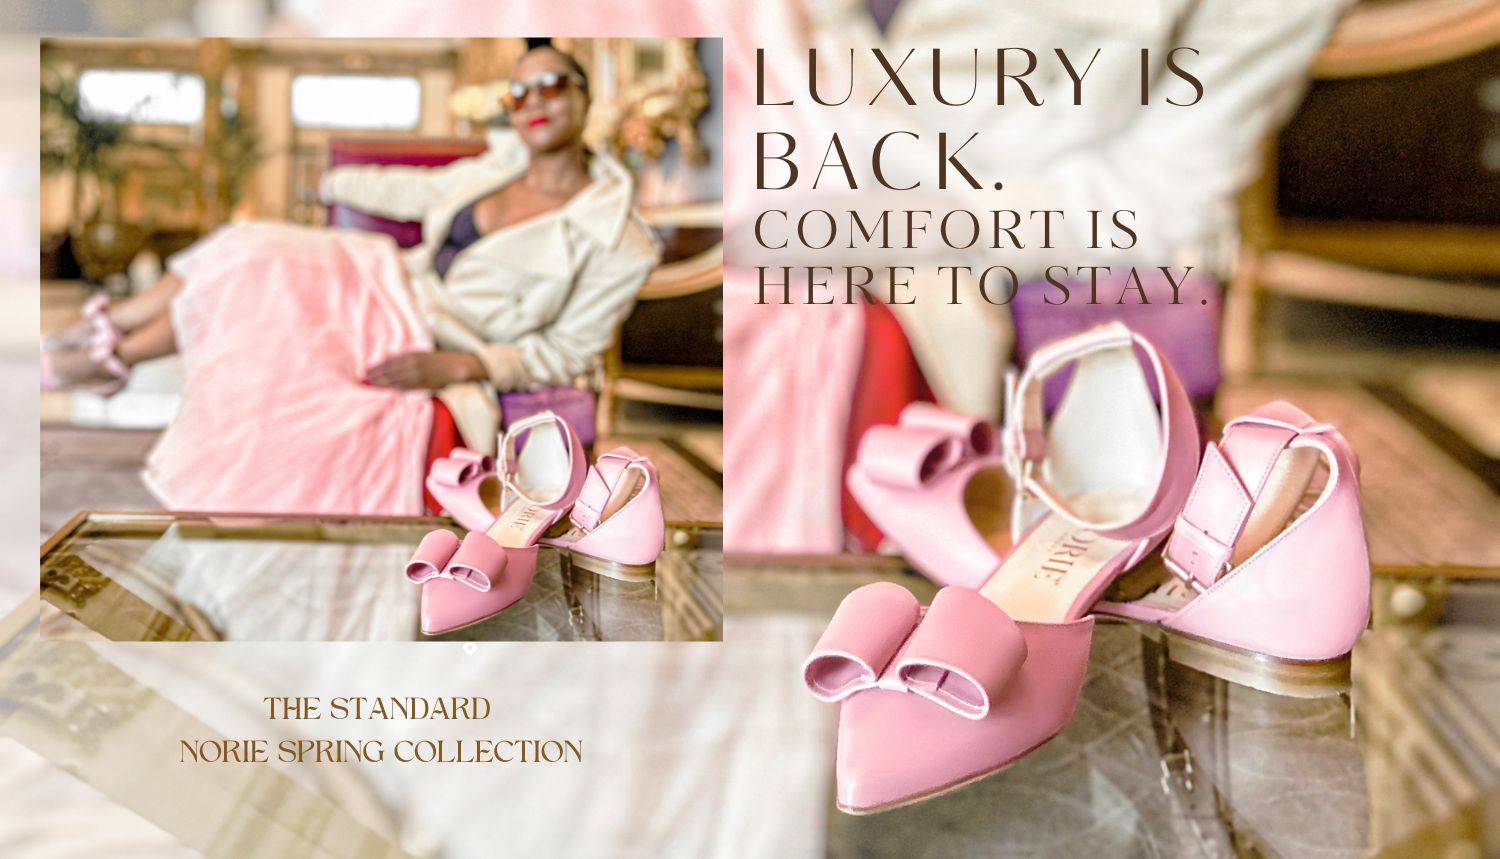 Luxury is Back - Black woman in pink dress lounges in gold hotel lobby, with pink The standard flat luxury italian-made sandals with bow on in the front of the image. 